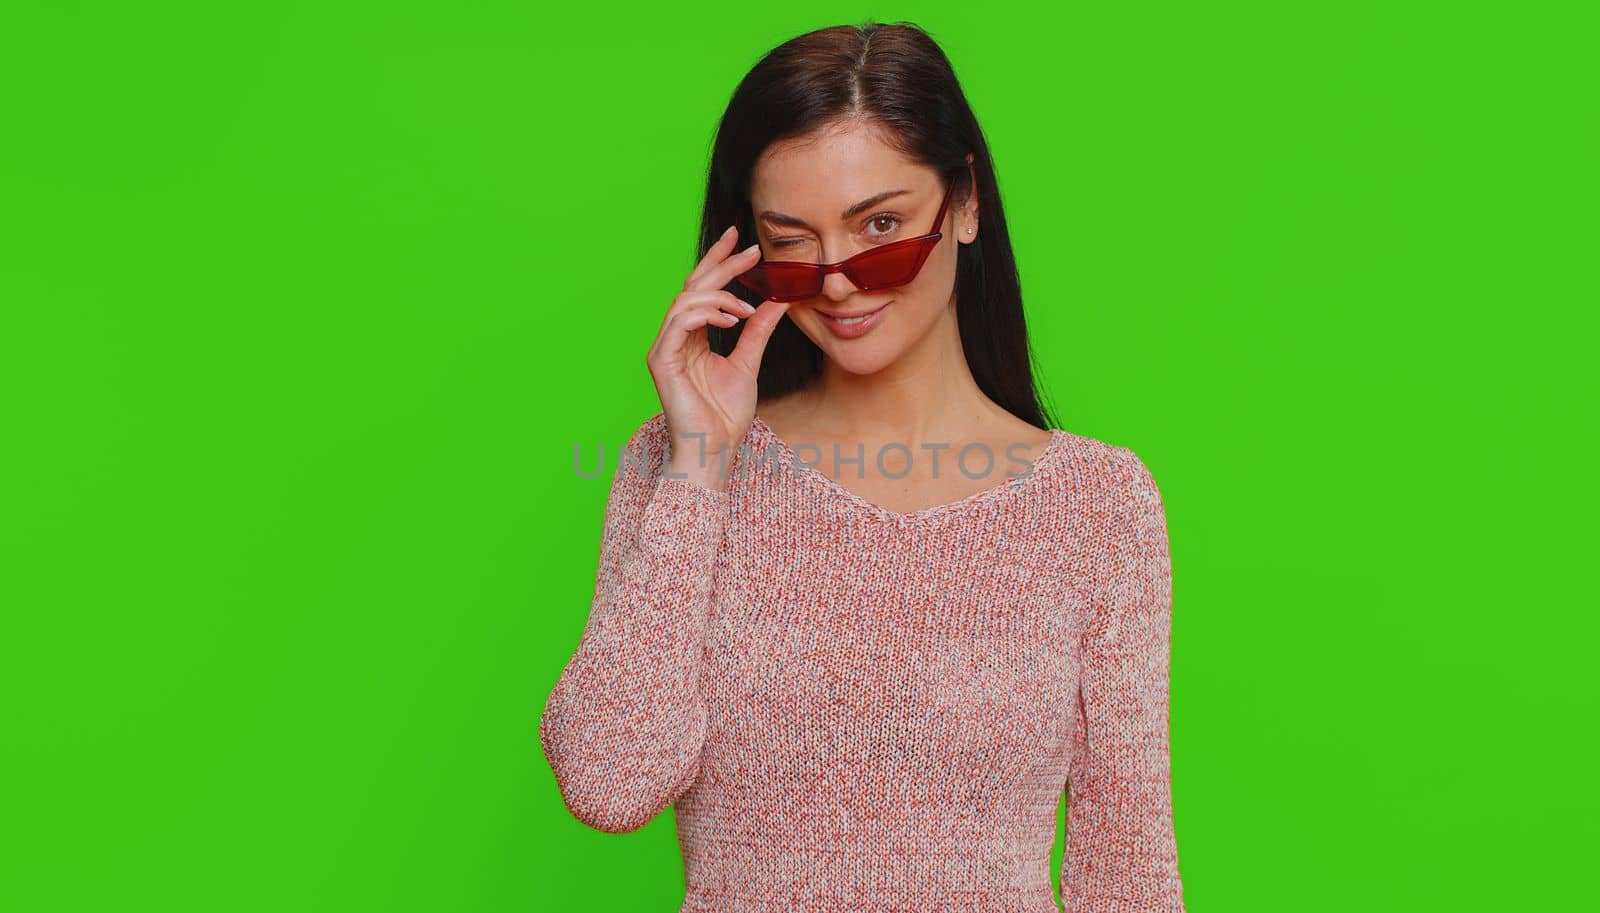 Portrait of happy pretty young woman in sweater wearing sunglasses, looking at camera with toothy charming smile, flirting, expressing optimism. Millennial girl isolated on green chroma key background